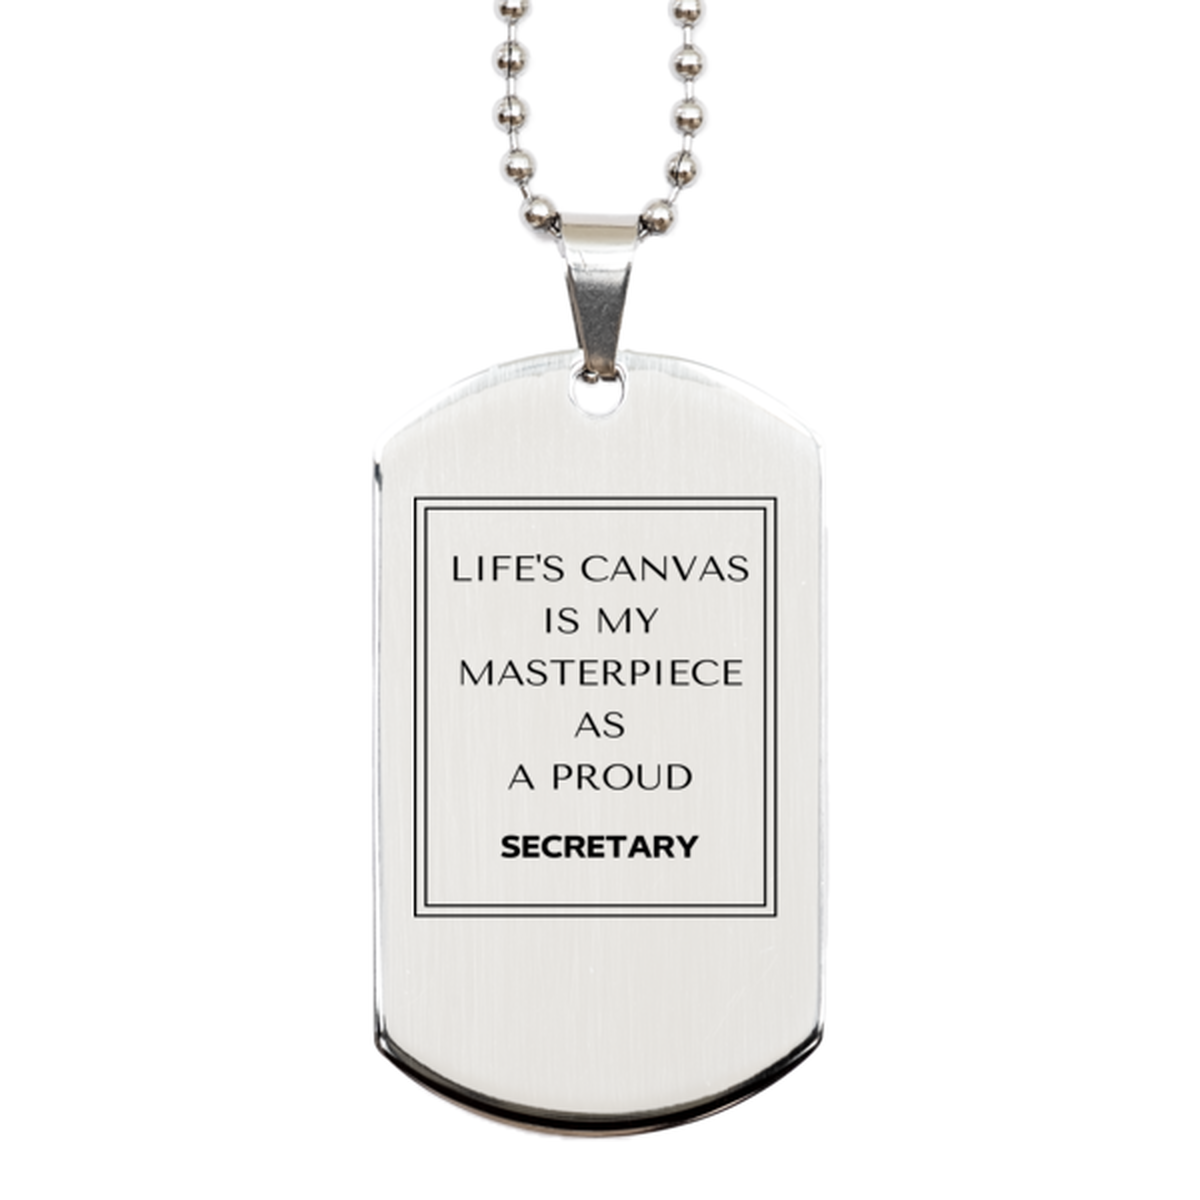 Proud Secretary Gifts, Life's canvas is my masterpiece, Epic Birthday Christmas Unique Silver Dog Tag For Secretary, Coworkers, Men, Women, Friends